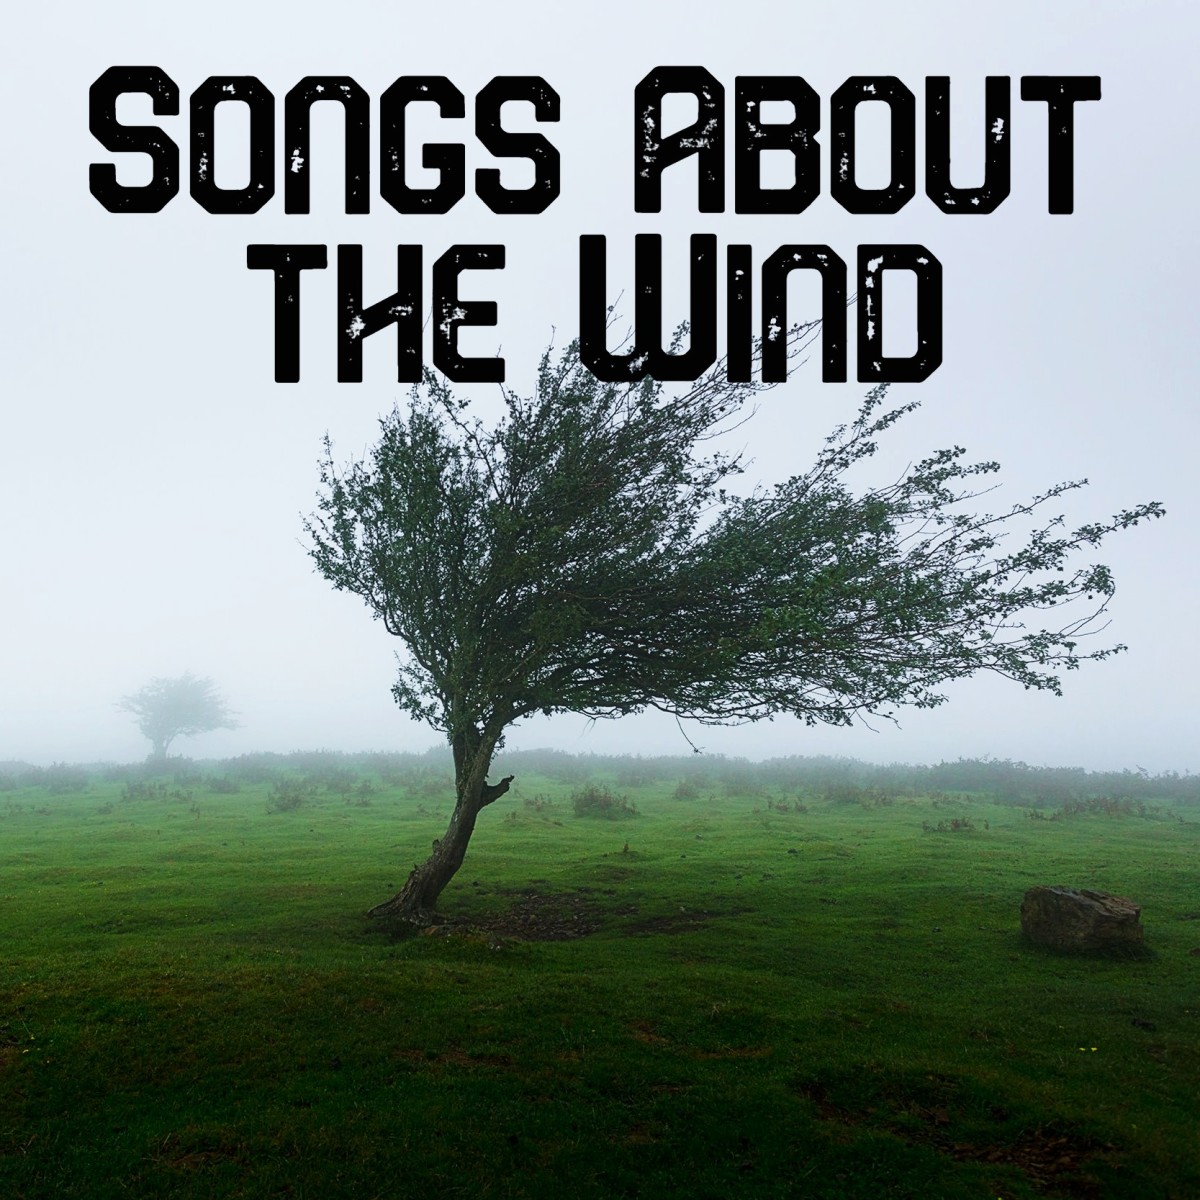 Whether you're facing a slight breeze, strong gust or gale, or a full blown hurricane, honor the grace and power of the wind with a playlist of pop, rock, country, and R&B songs.